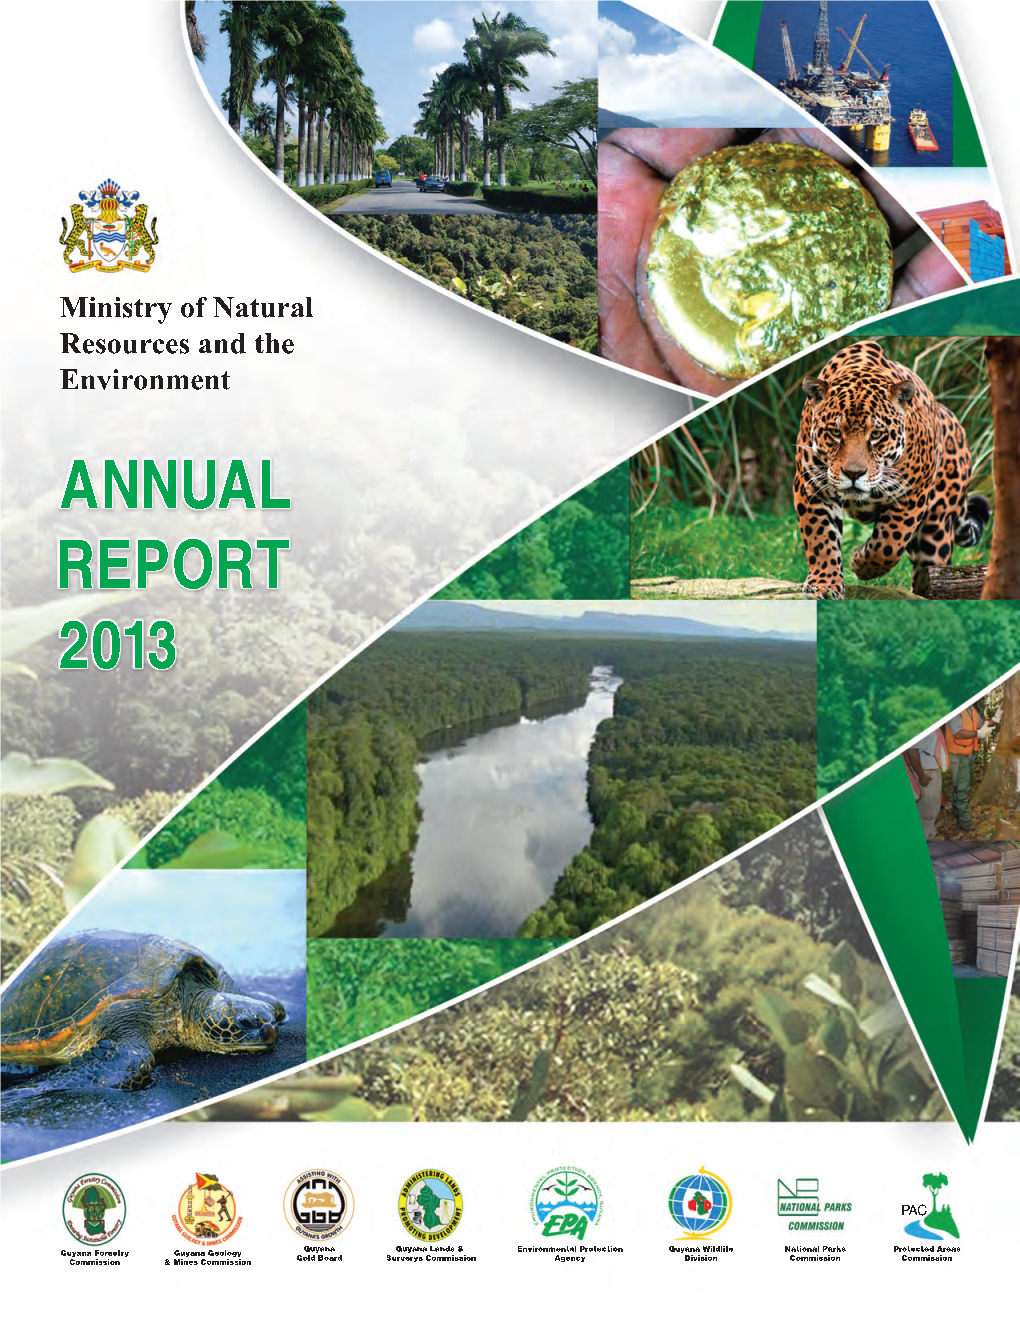 The Ministry of Natural Resources and the Environment (MNRE) Was Established on December 17, 2011